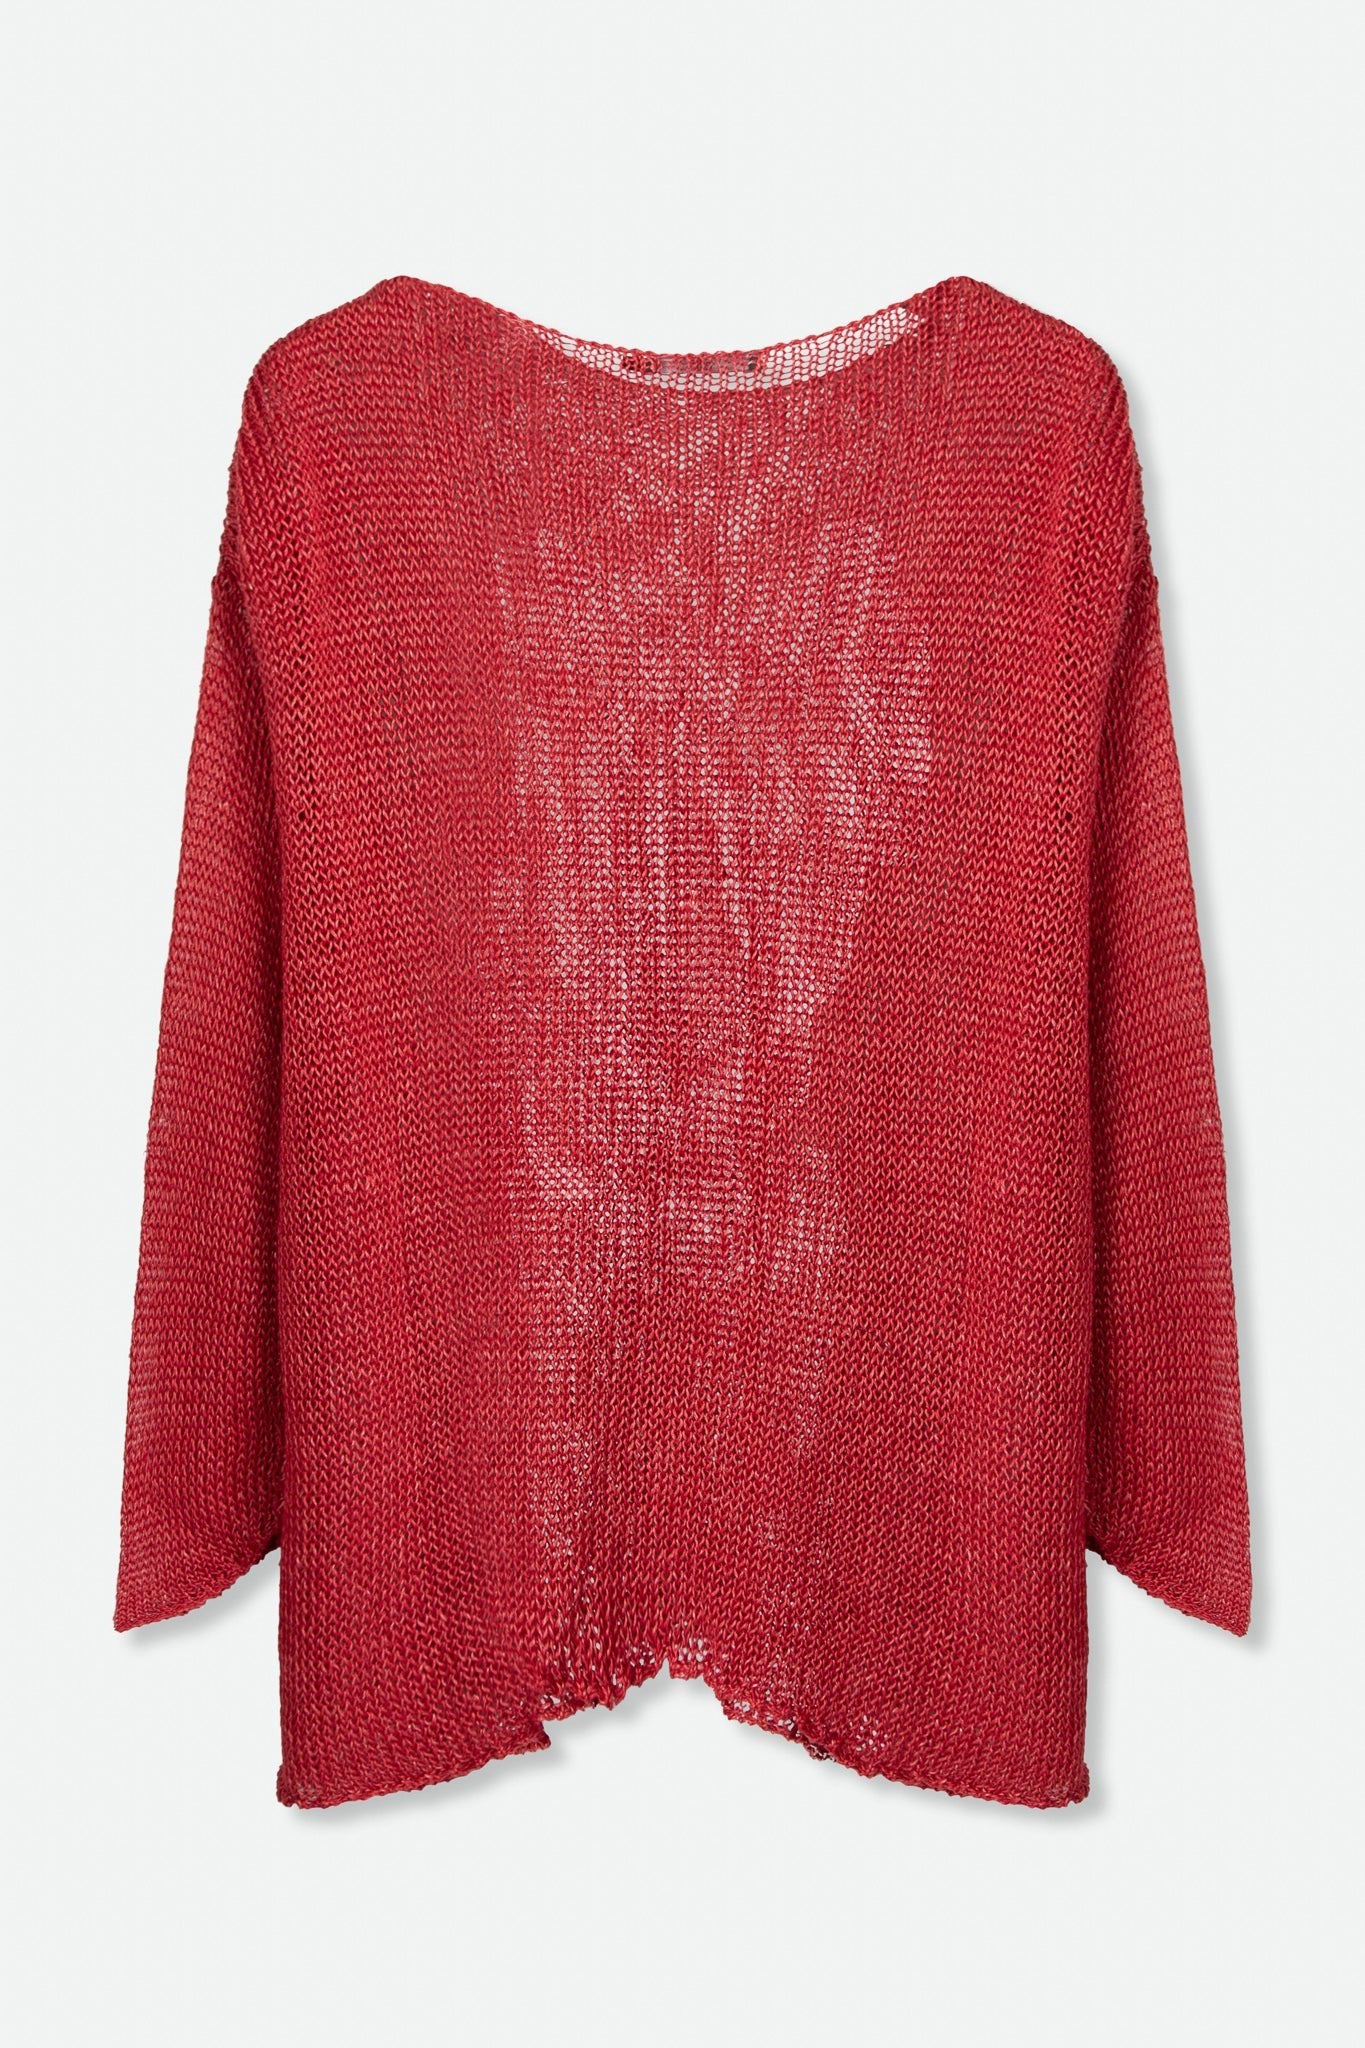 SAPOL RELAXED OPEN NECK PULLOVER IN LINEN KNIT POPPY RED - Jarbo